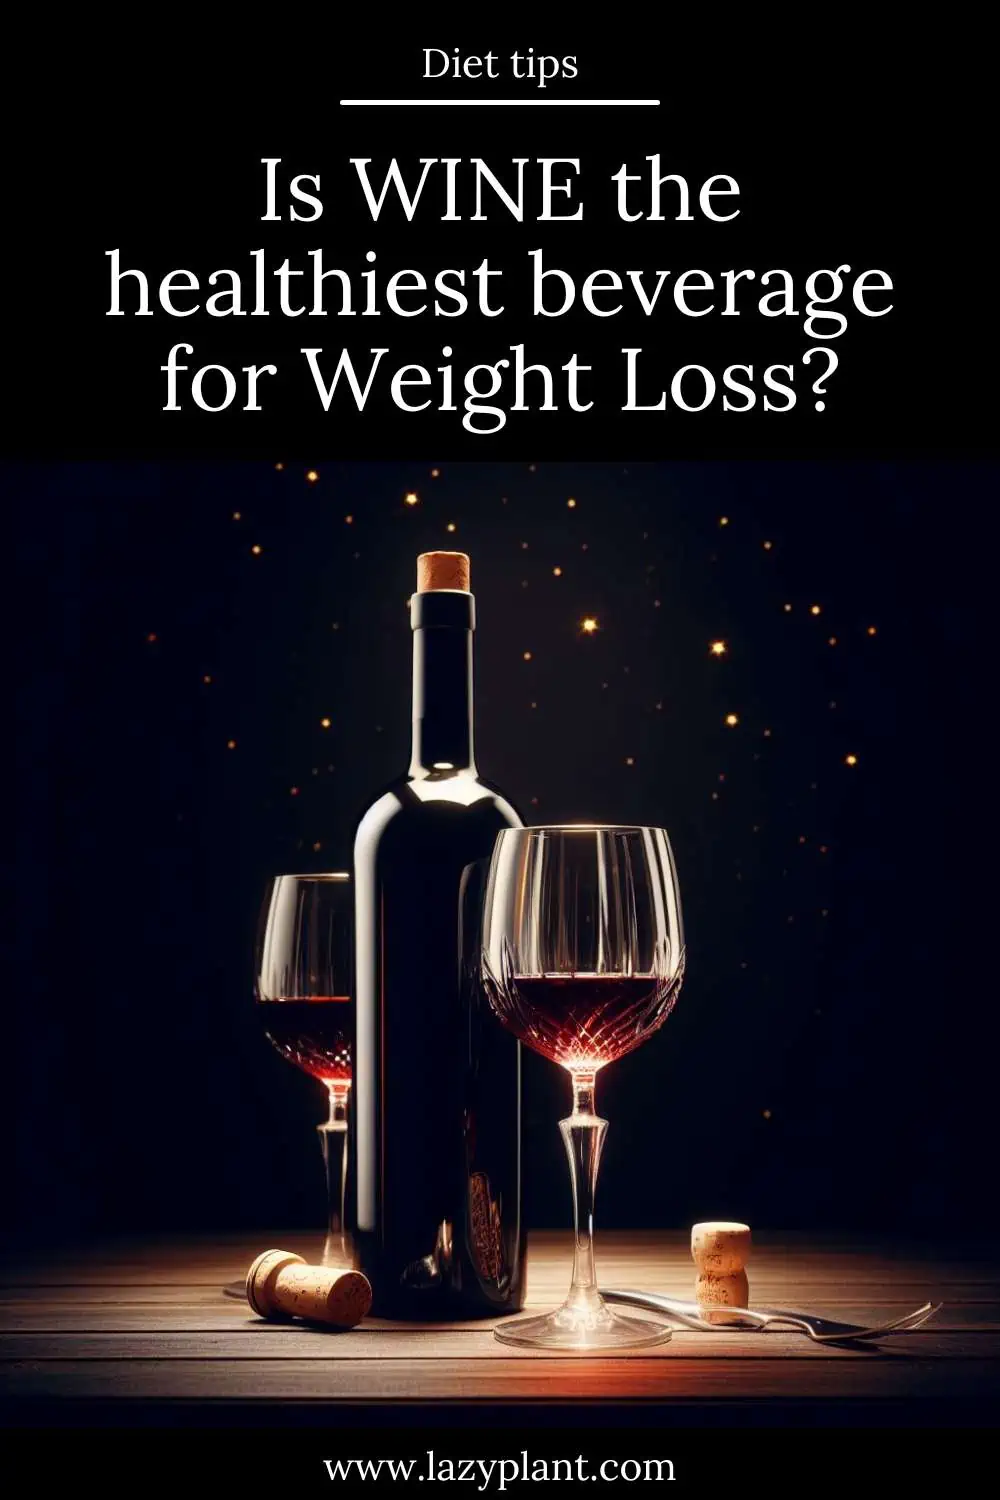 Wine: is it the best beverage for Weight Loss?